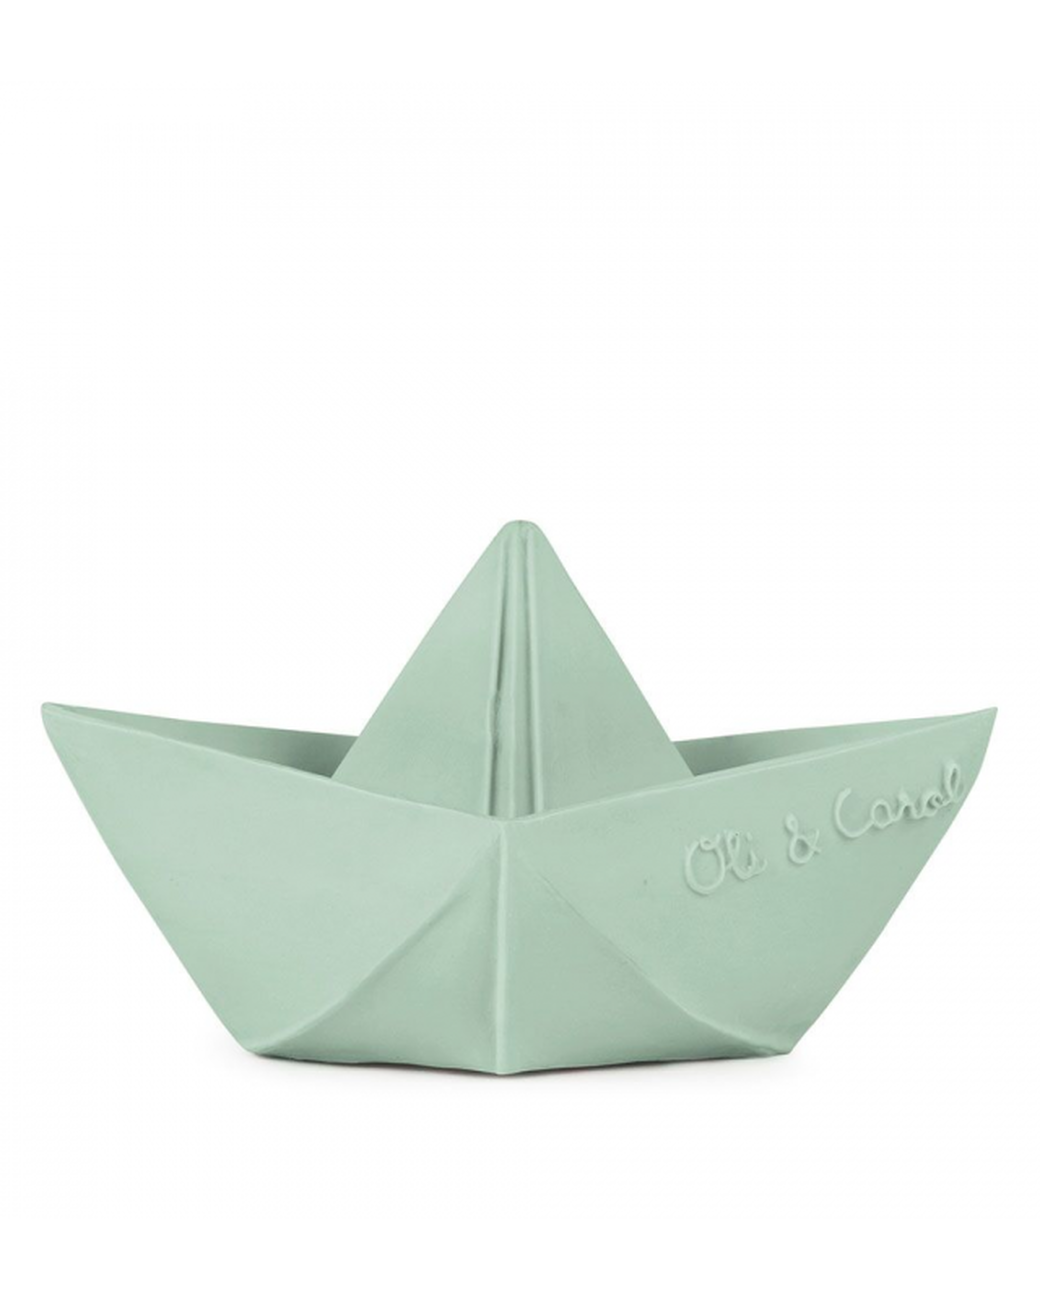 origami boat kids gift guide